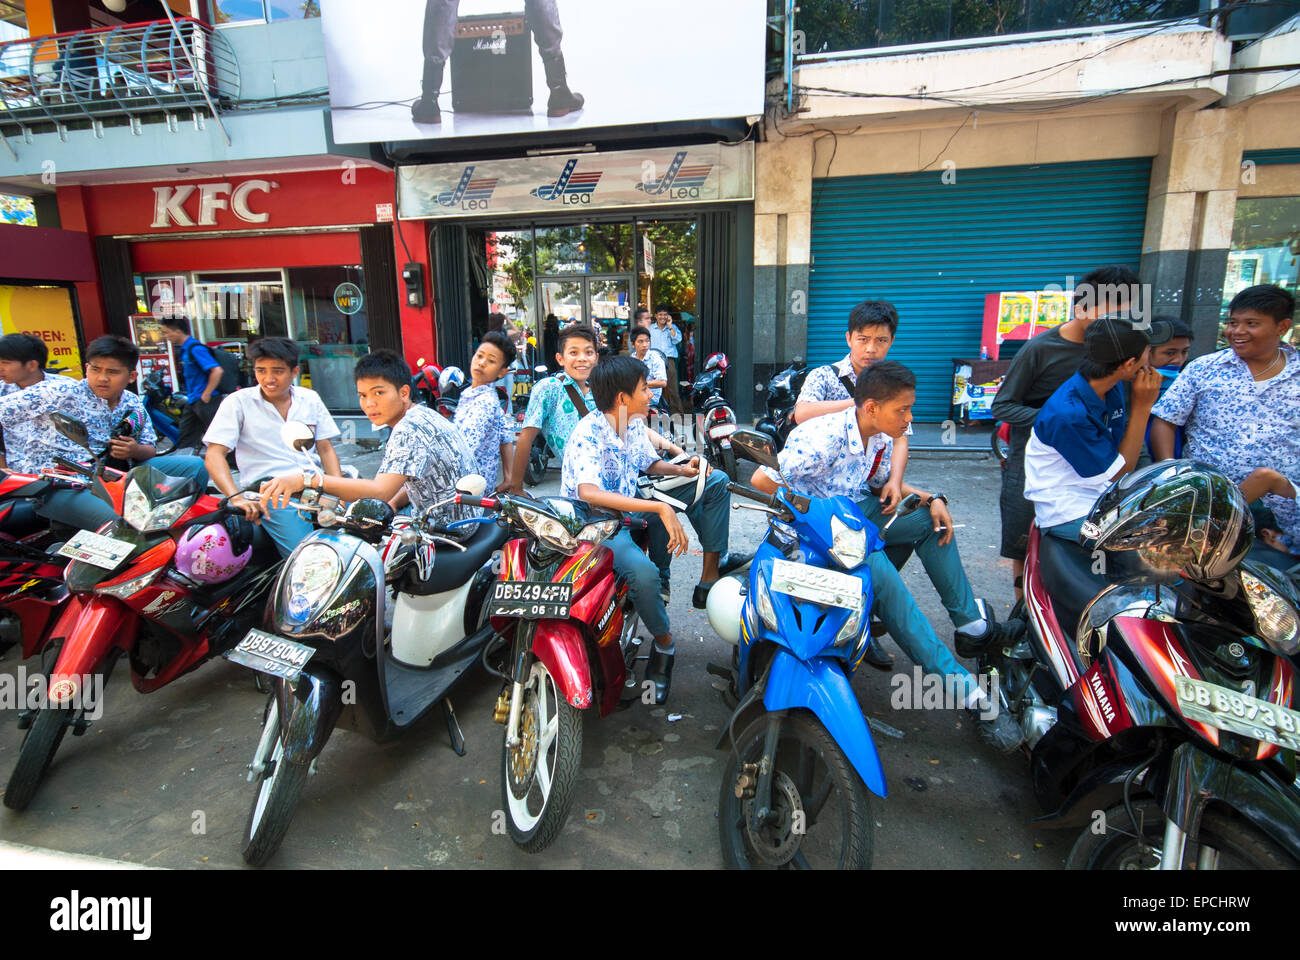 delivery boys on motorcycles at kfc in manado sulawesi indonesia Stock Photo